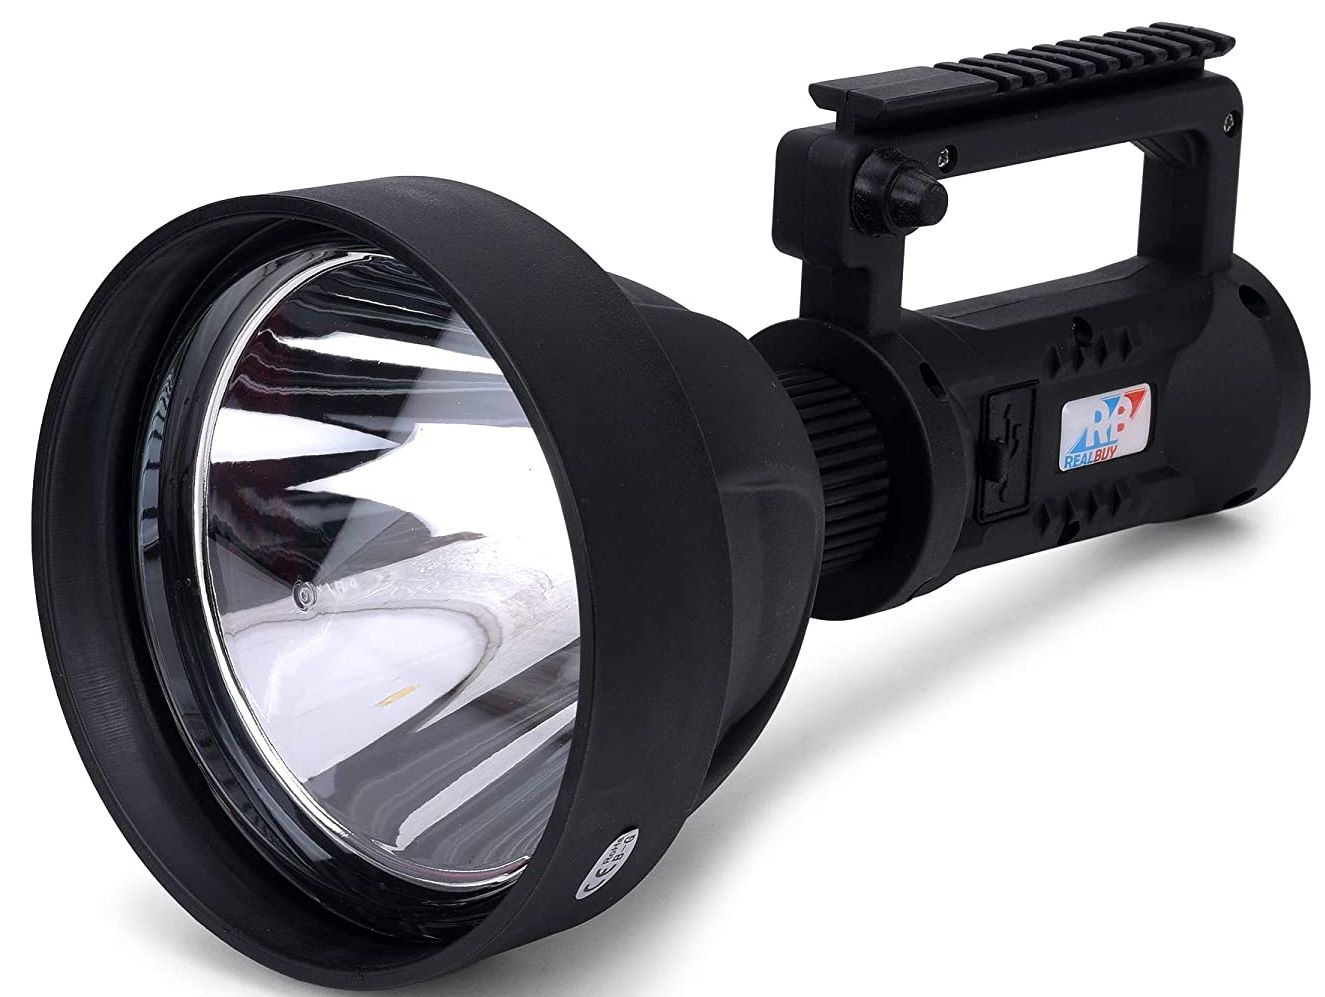 REALBUY LED Search Light 15W